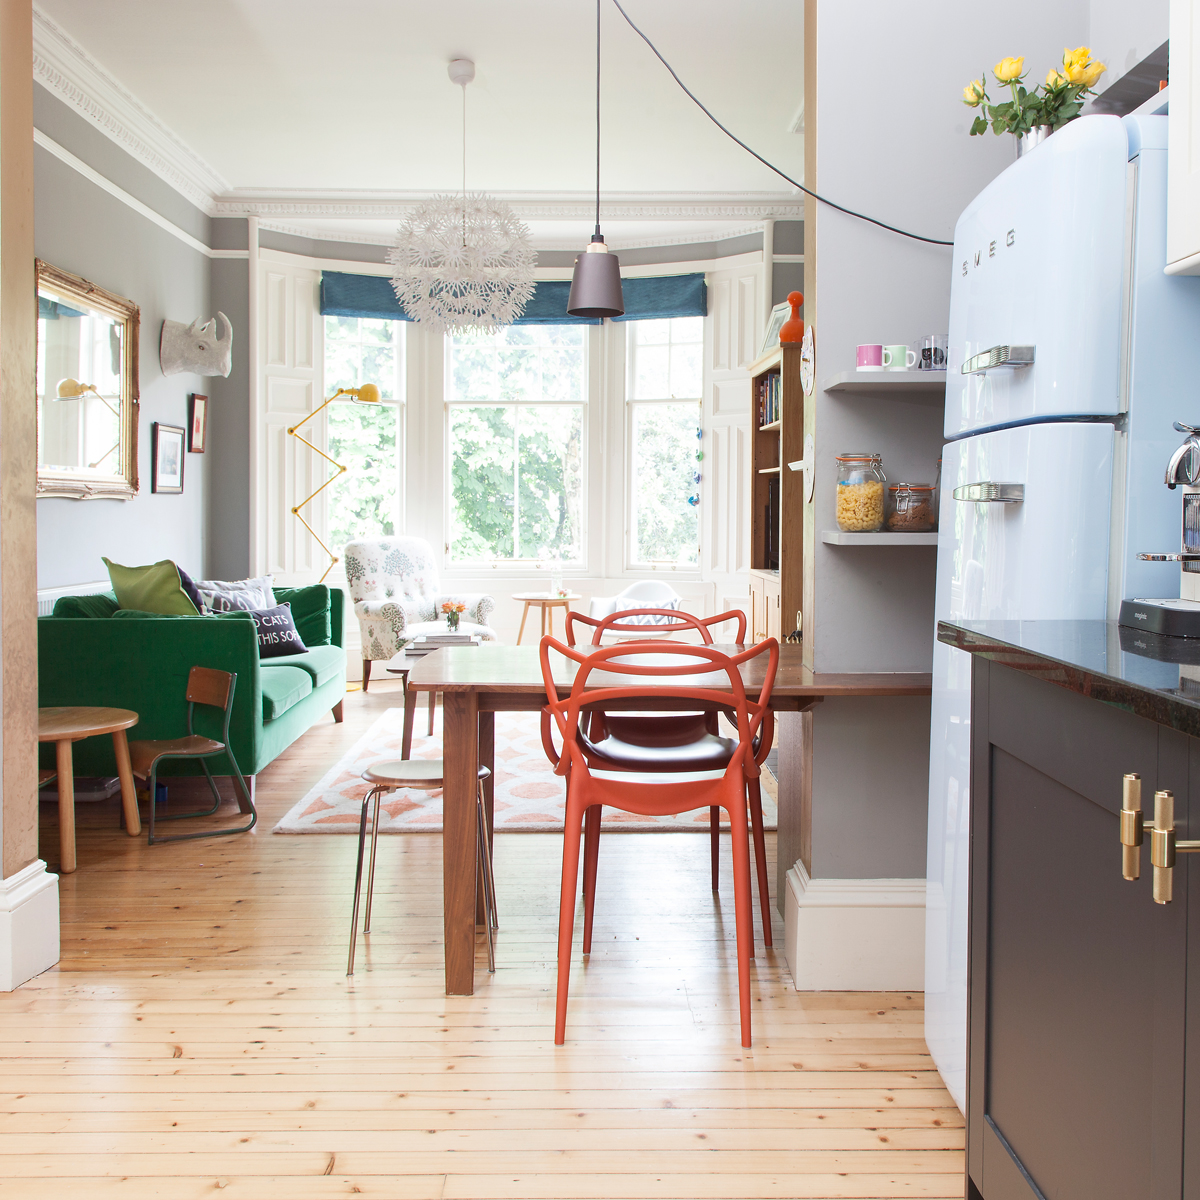 Open plan living at The Pink House/Photo: Susie Lowe